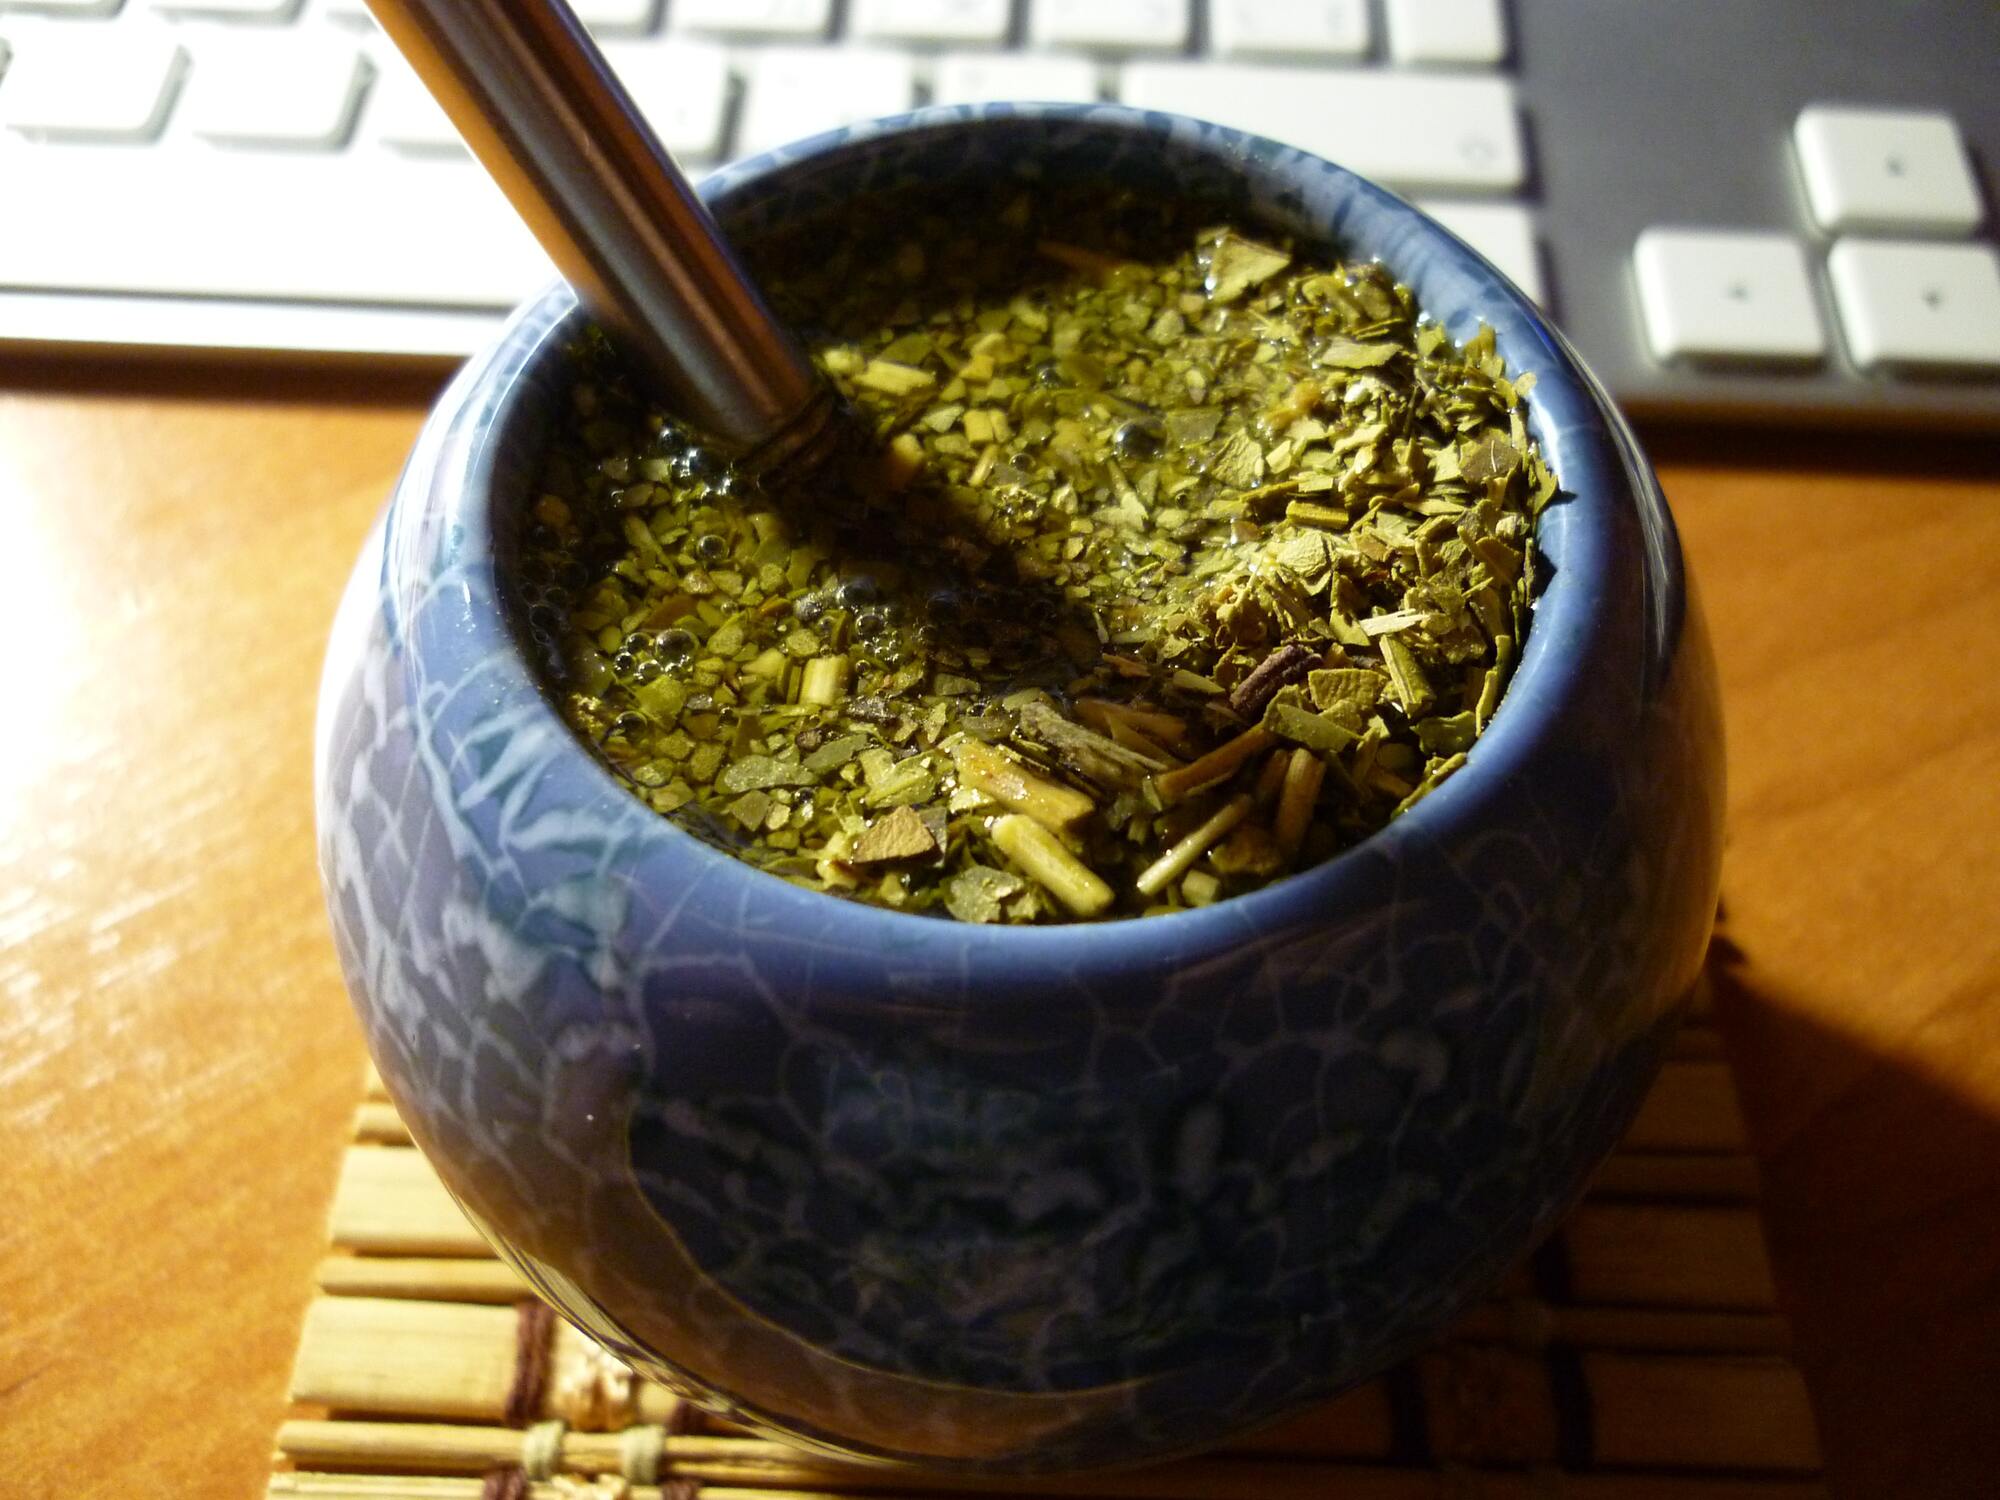 mate gourd with yerba mate